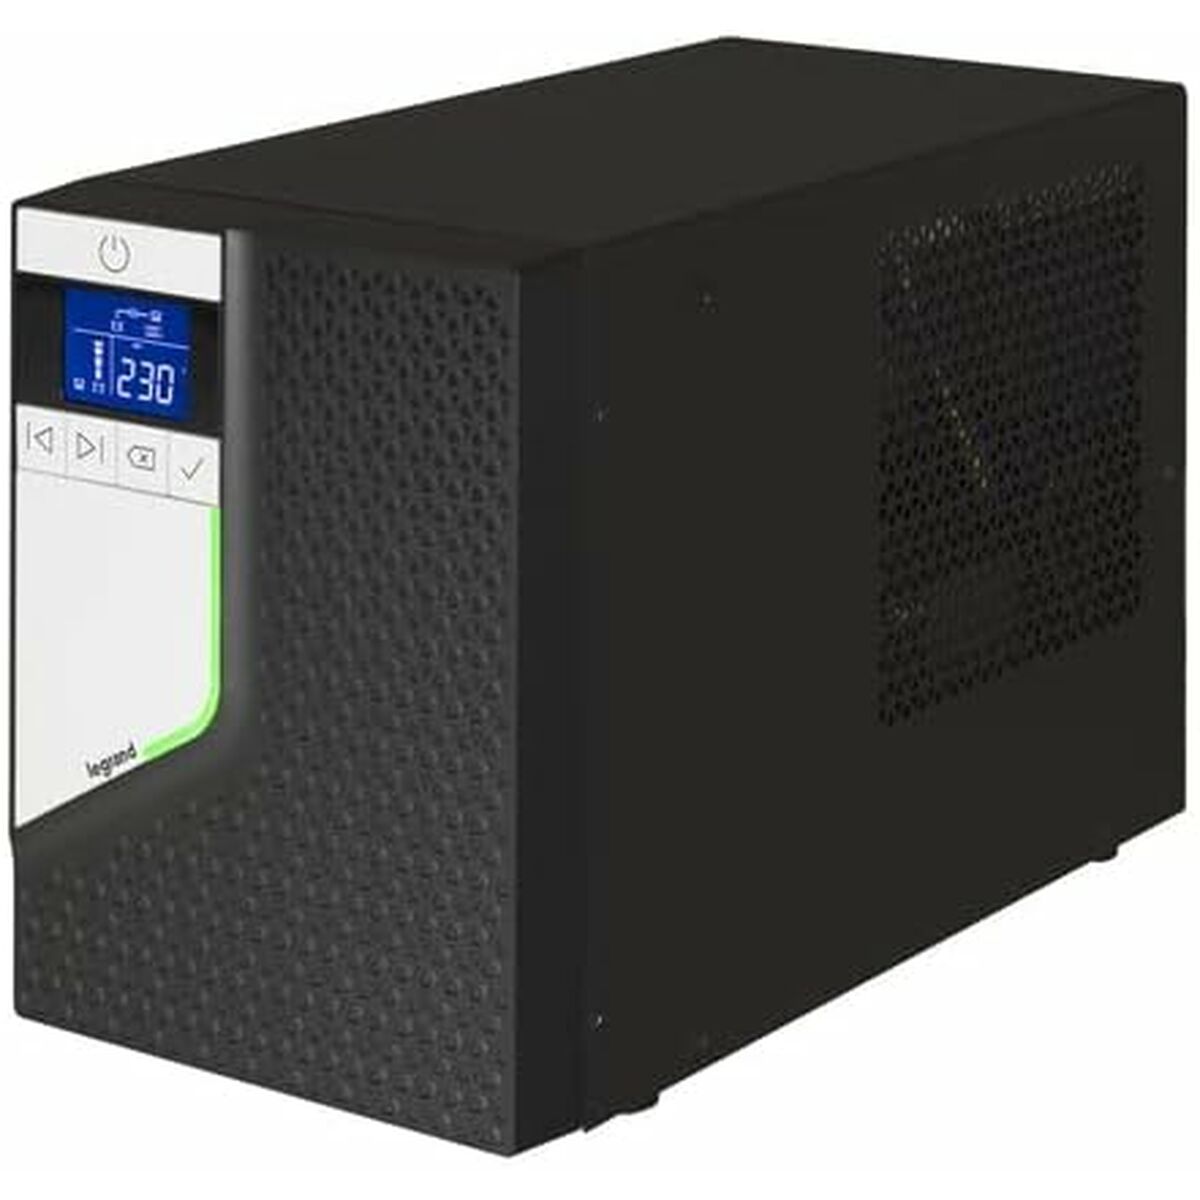 Uninterruptible Power Supply System Interactive UPS Legrand LG-311061 800 W 1000 VA, Legrand, Computing, Accessories, uninterruptible-power-supply-system-interactive-ups-legrand-lg-311061-800-w-1000-va, Brand_Legrand, category-reference-2609, category-reference-2642, category-reference-2845, category-reference-t-19685, category-reference-t-19908, category-reference-t-21341, computers / peripherals, Condition_NEW, office, Price_400 - 500, Teleworking, RiotNook